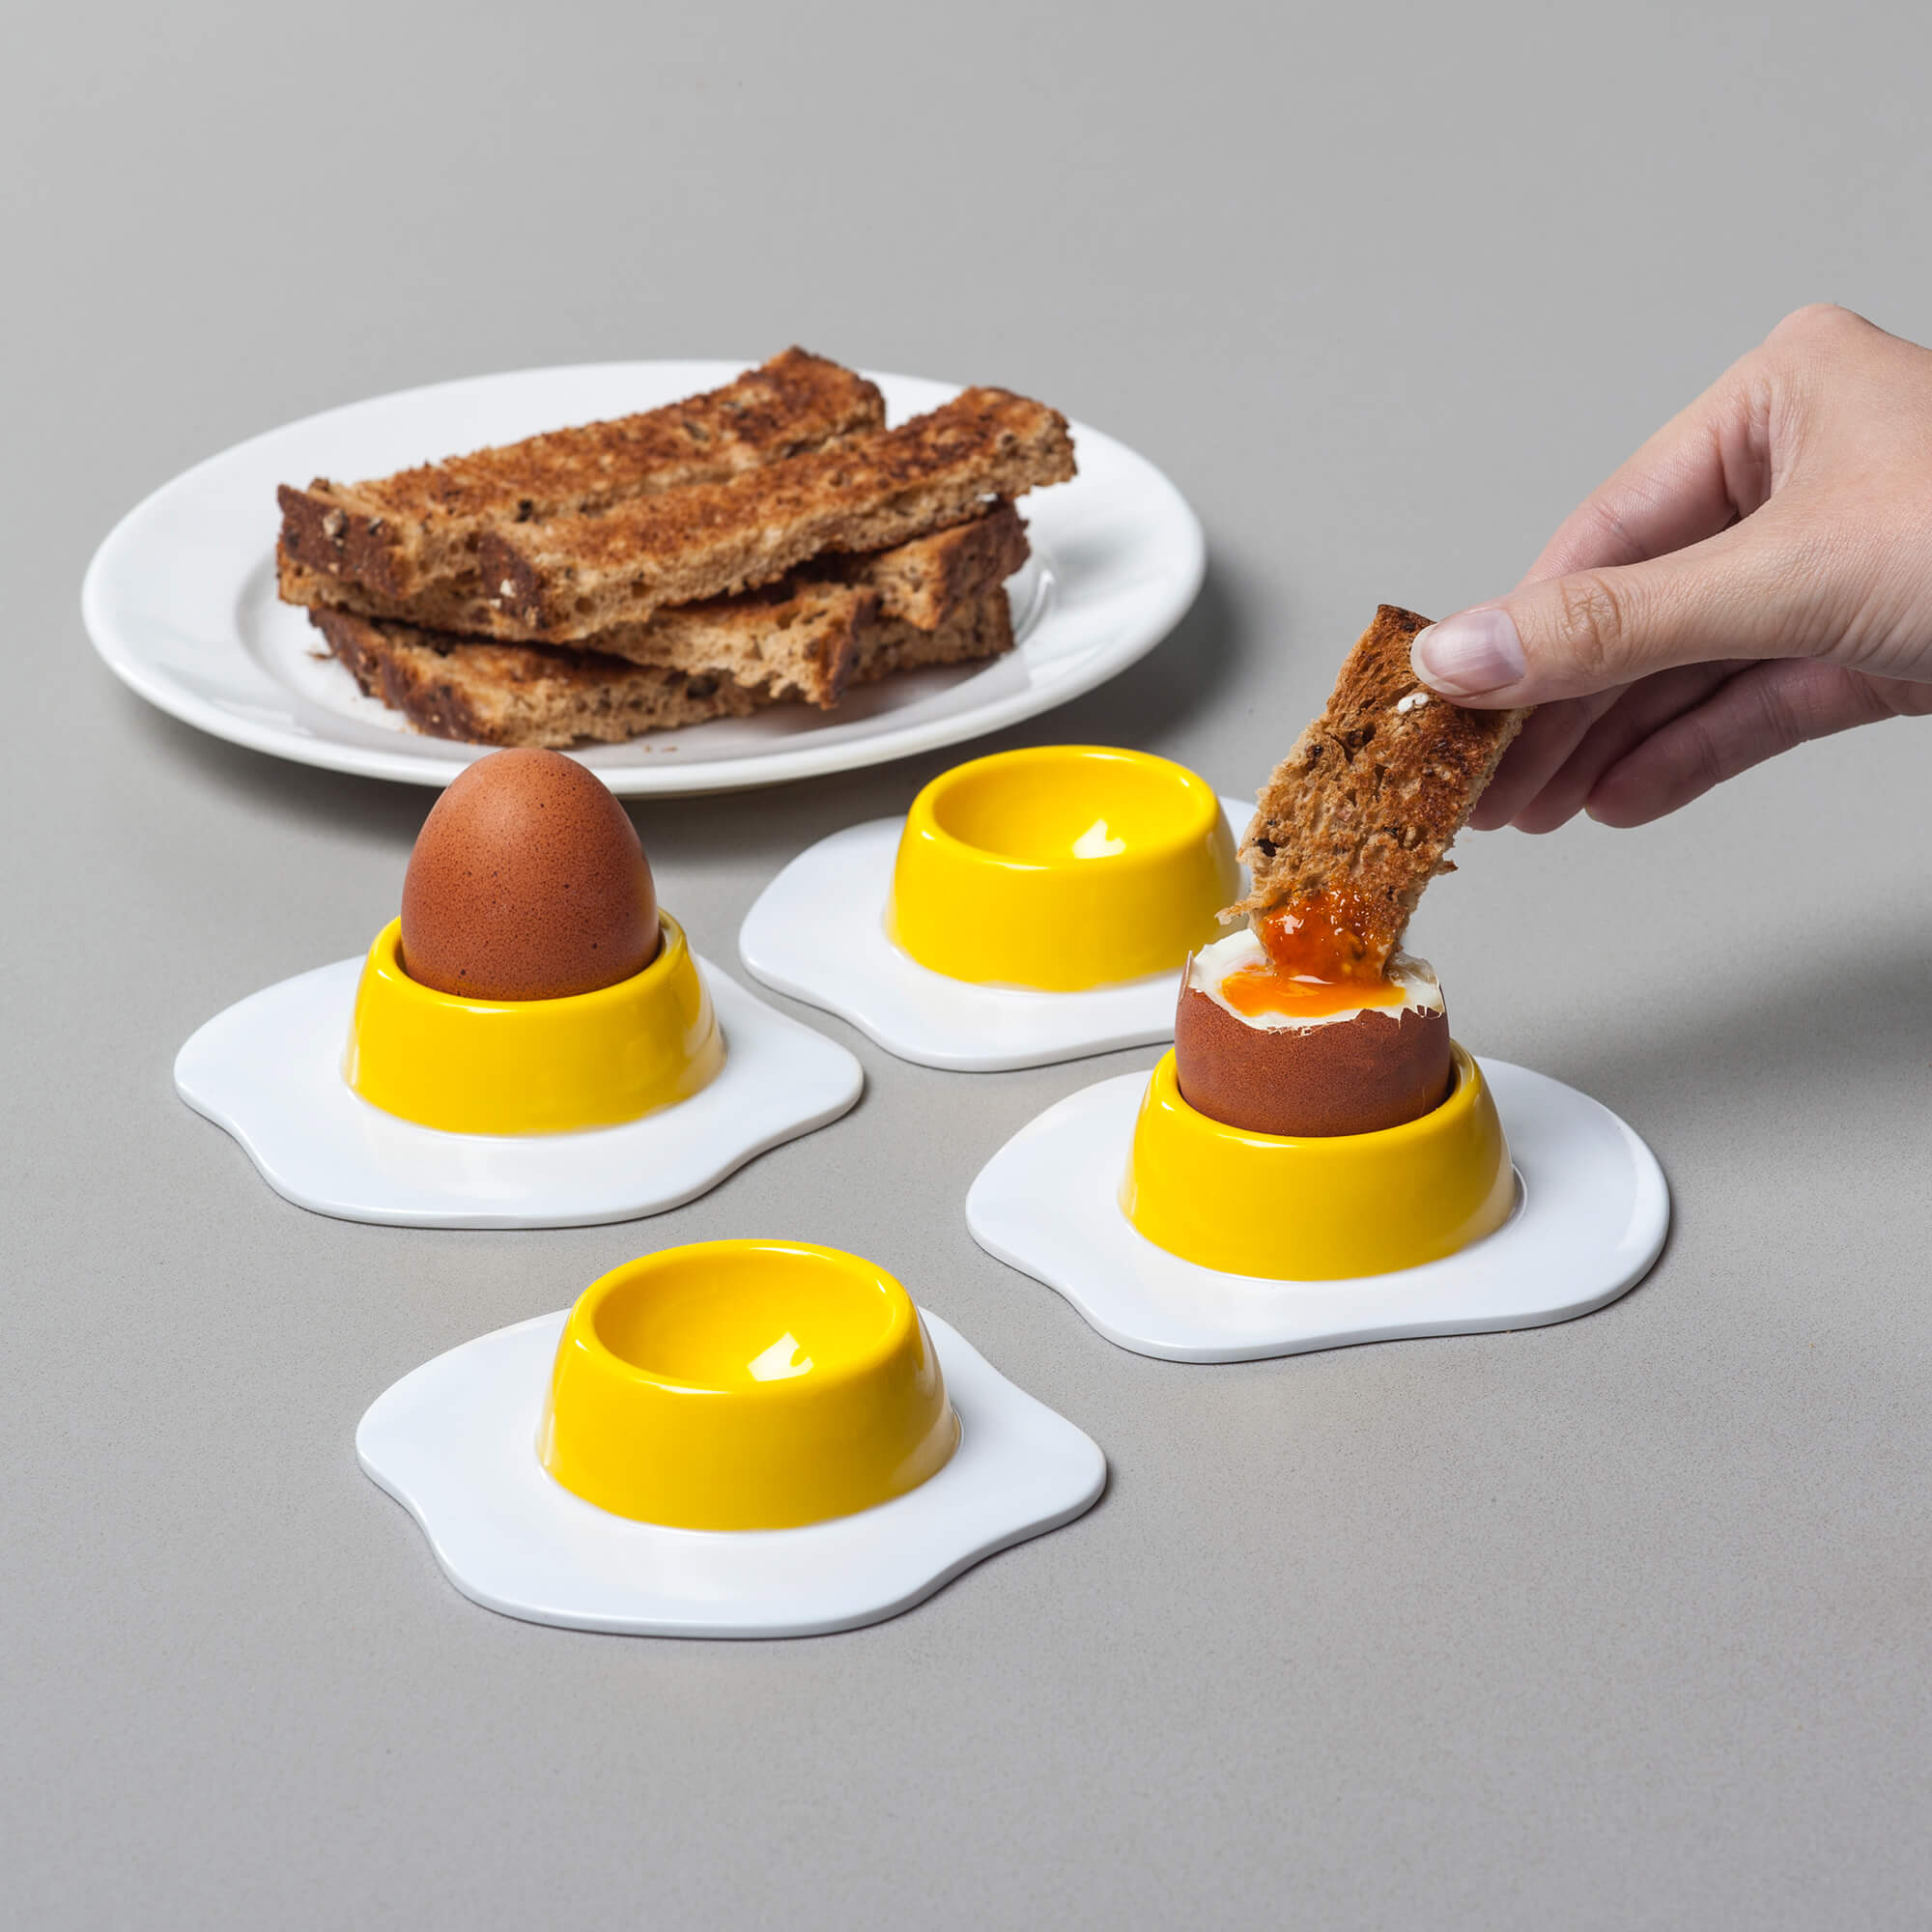 Set of 4 novelty Eggtastic Egg Cups with toast and soldiers